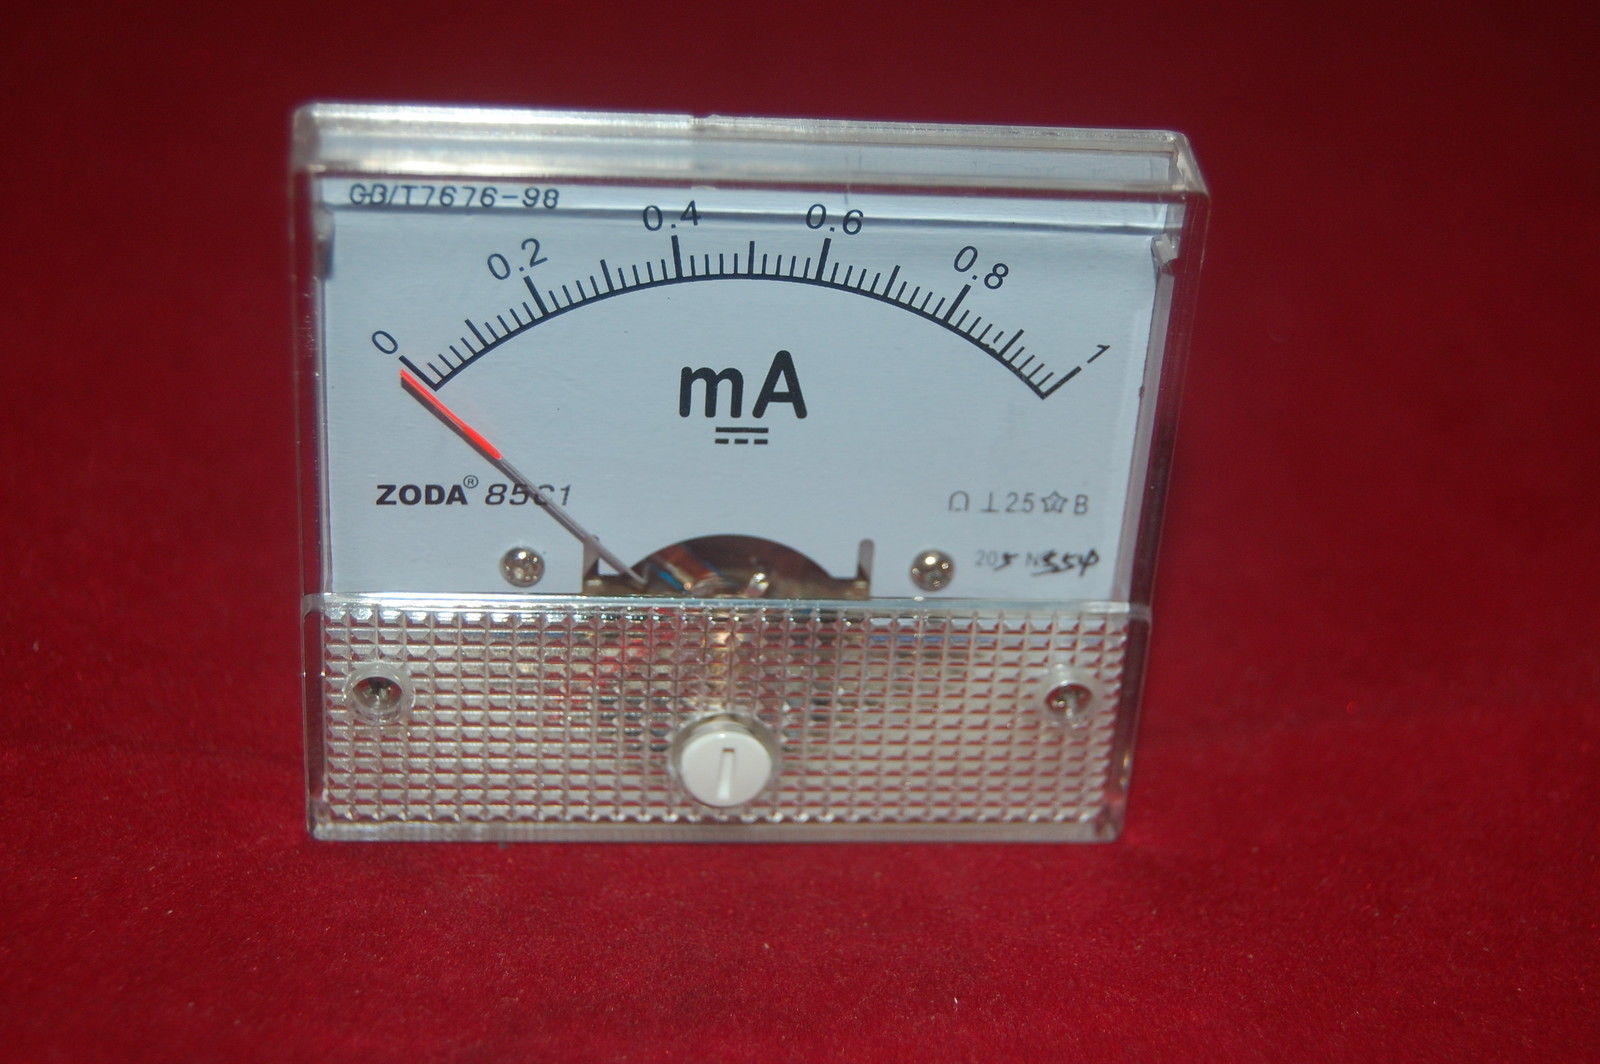 1pc DC 1mA Analog Ammeter Panel Current Meter 85C1 0-1mA DC directly Connect